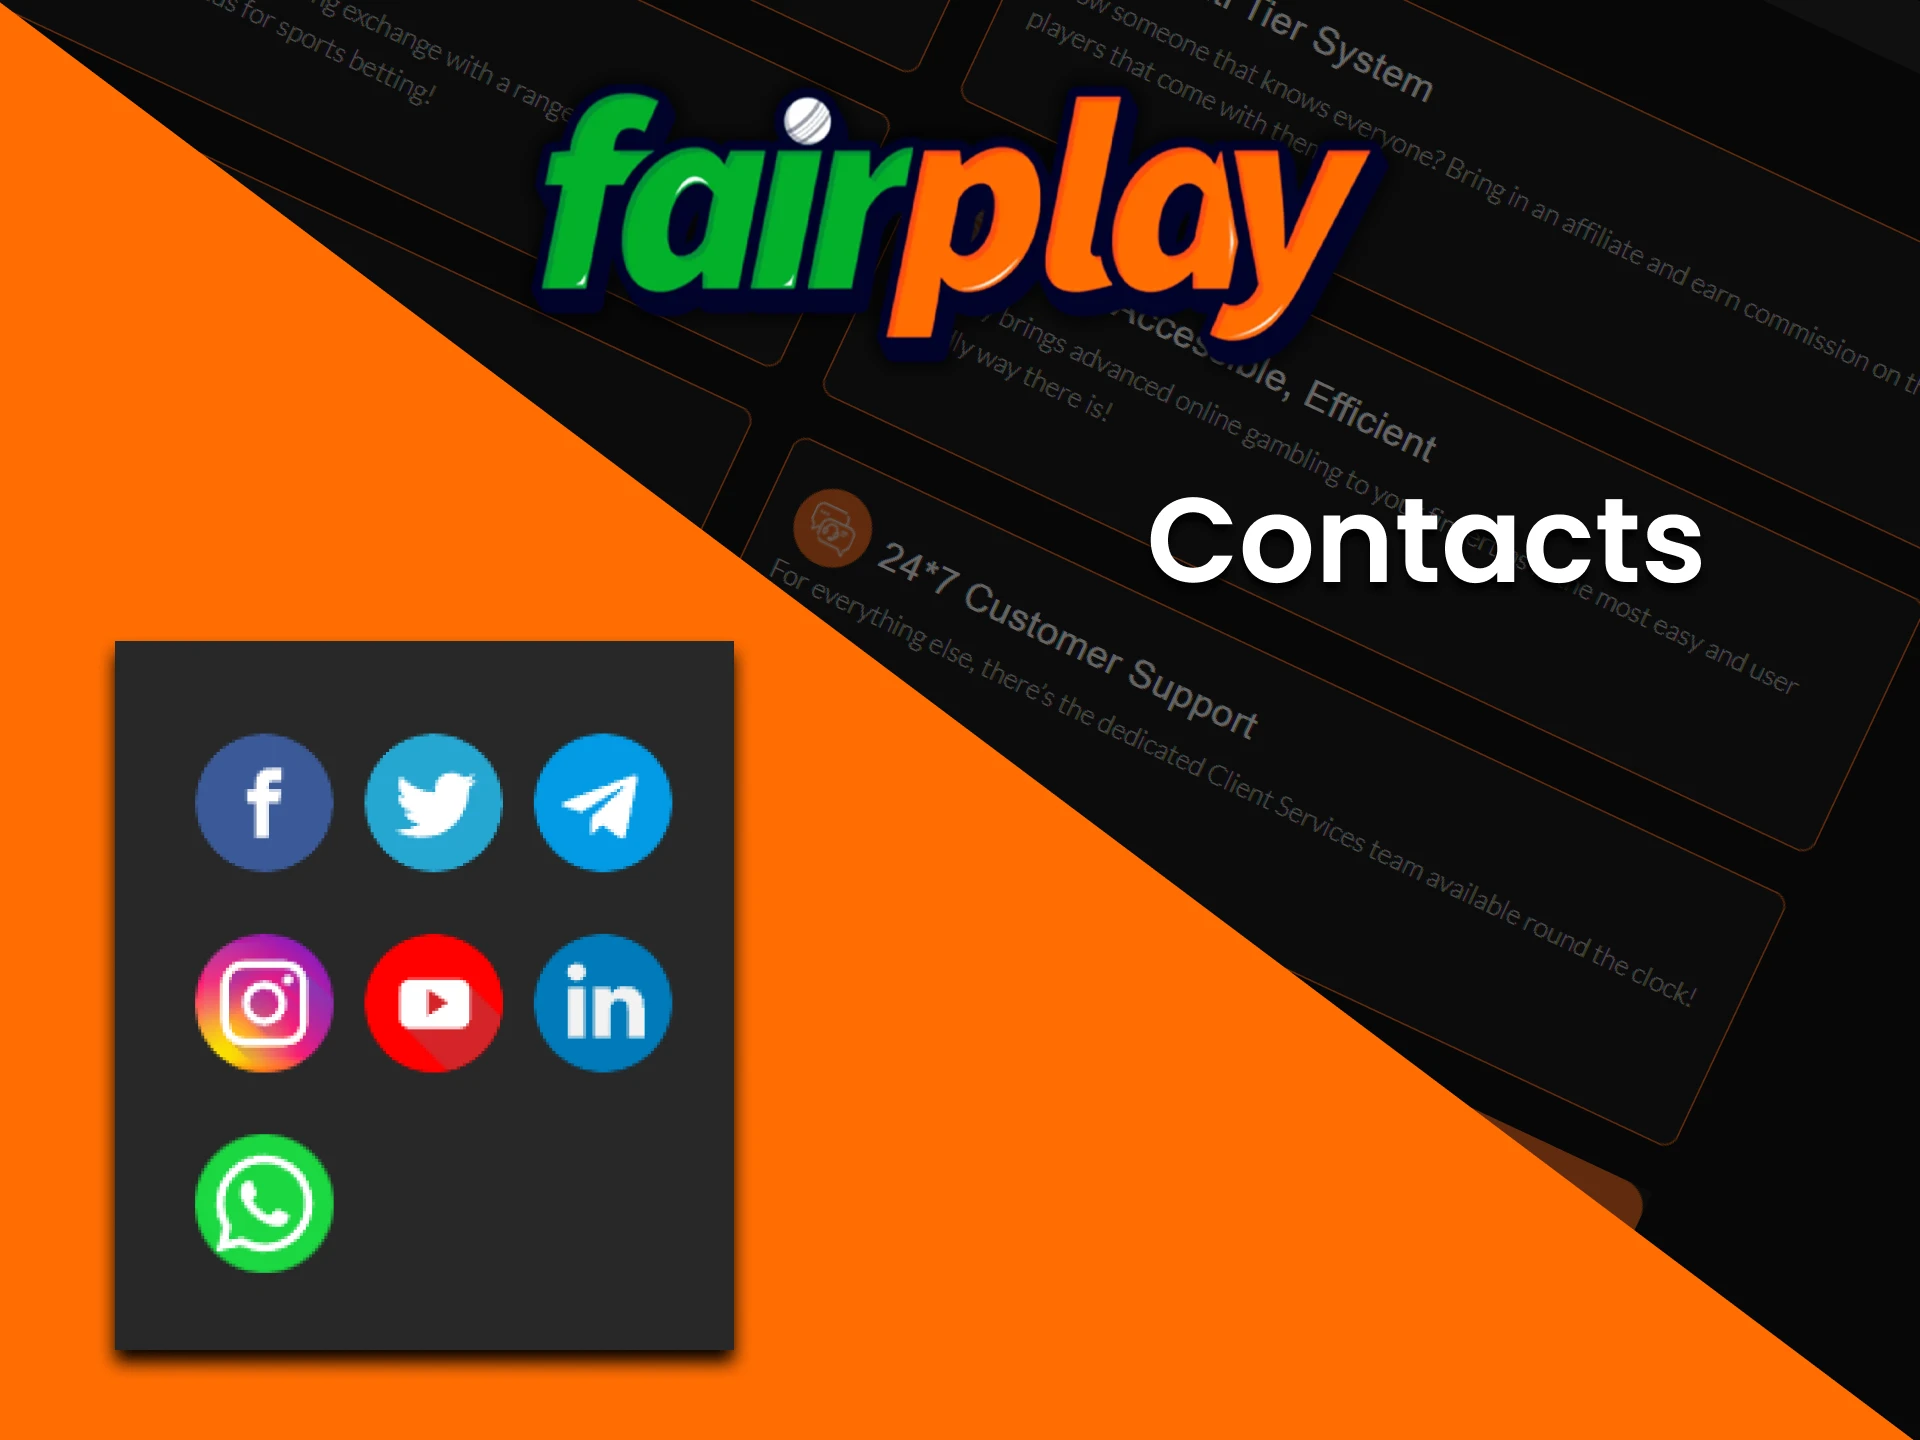 Contact Fairplay if your struggle with something.